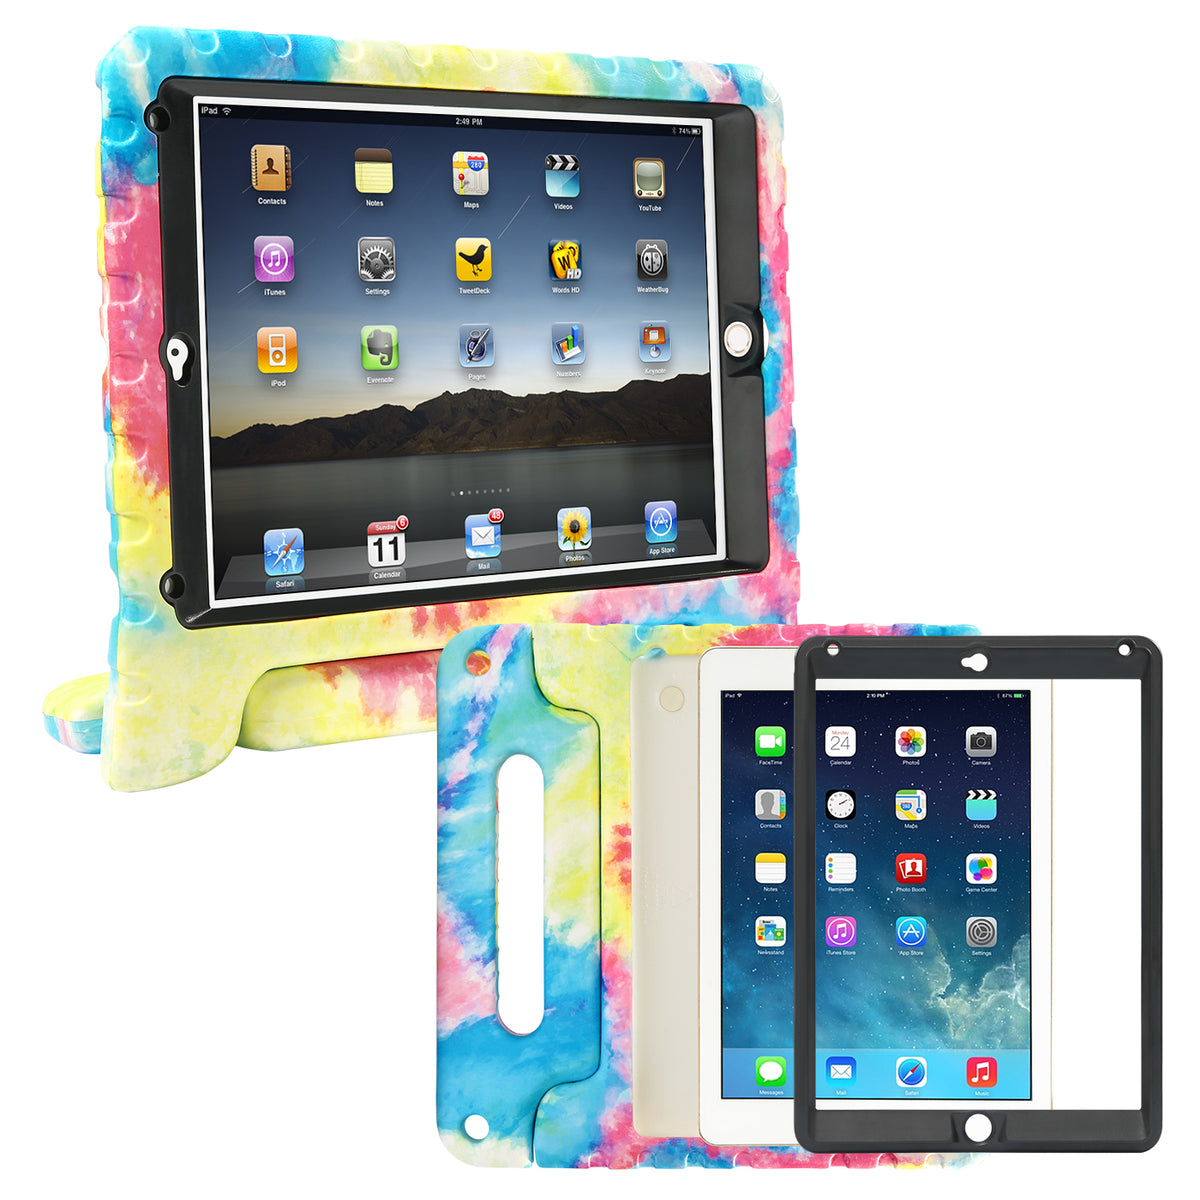 ipad air 2 cases for teens